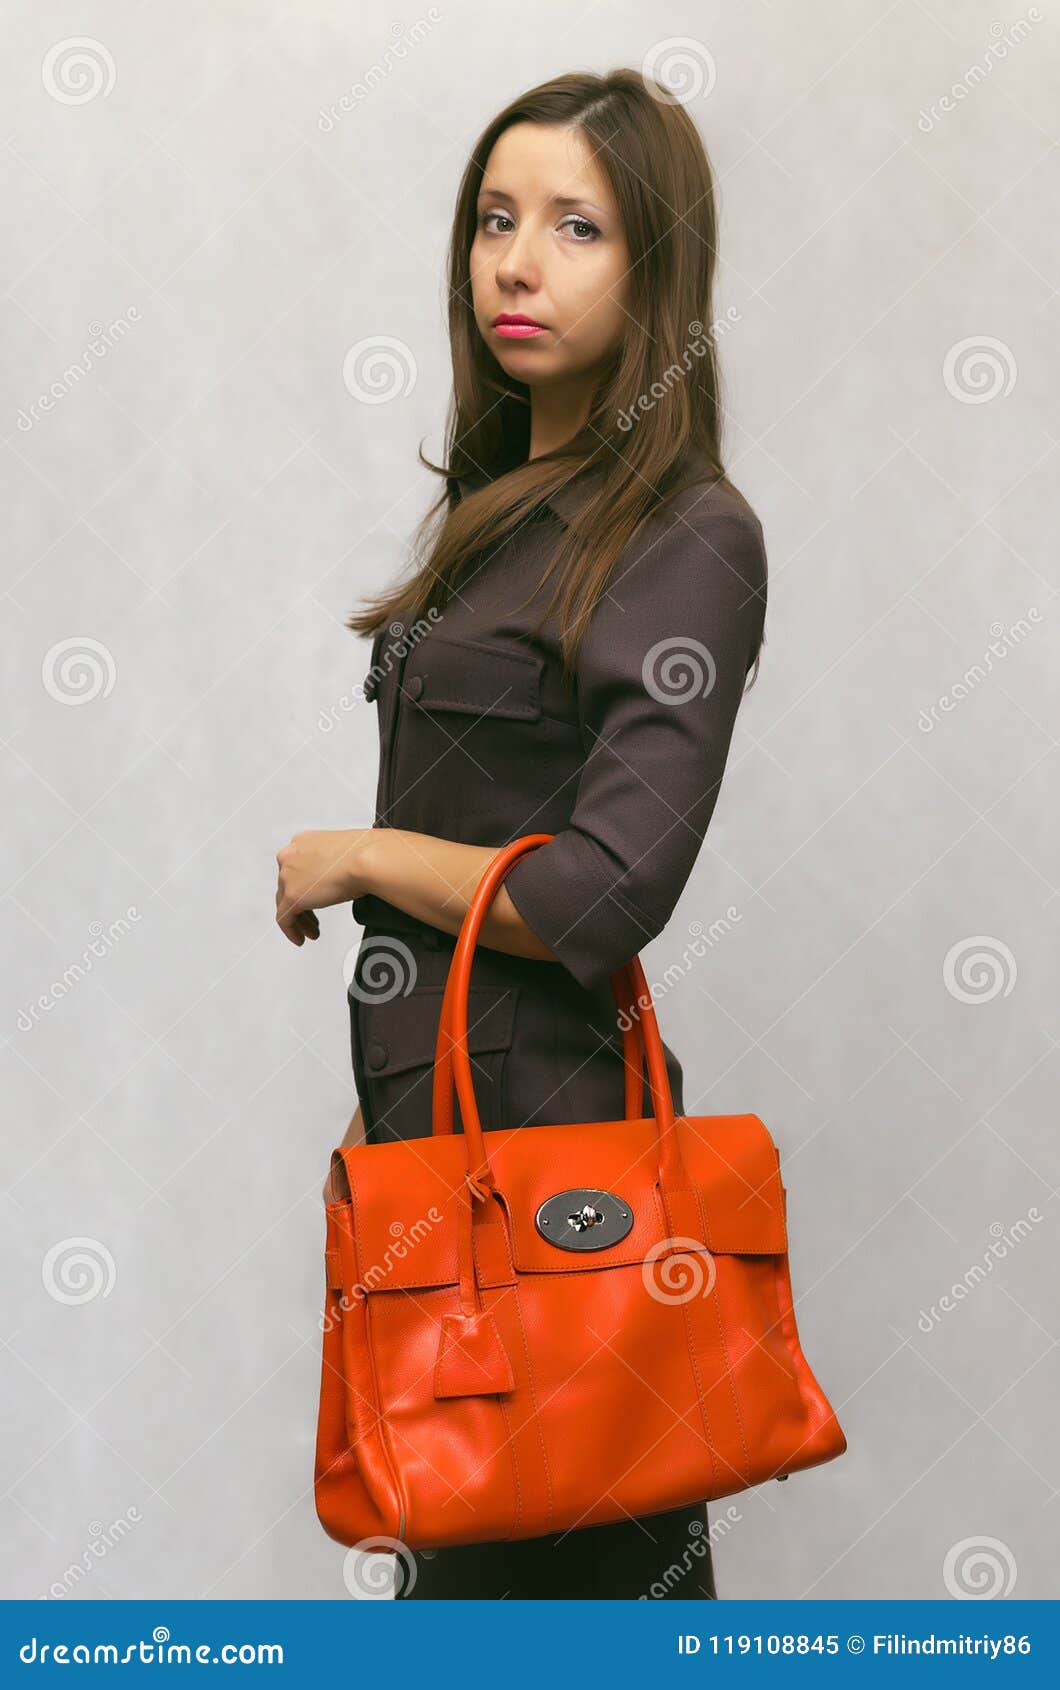 Cute Little Girl Holding a Purse Stock Image - Image of girl, caucasian:  42257419